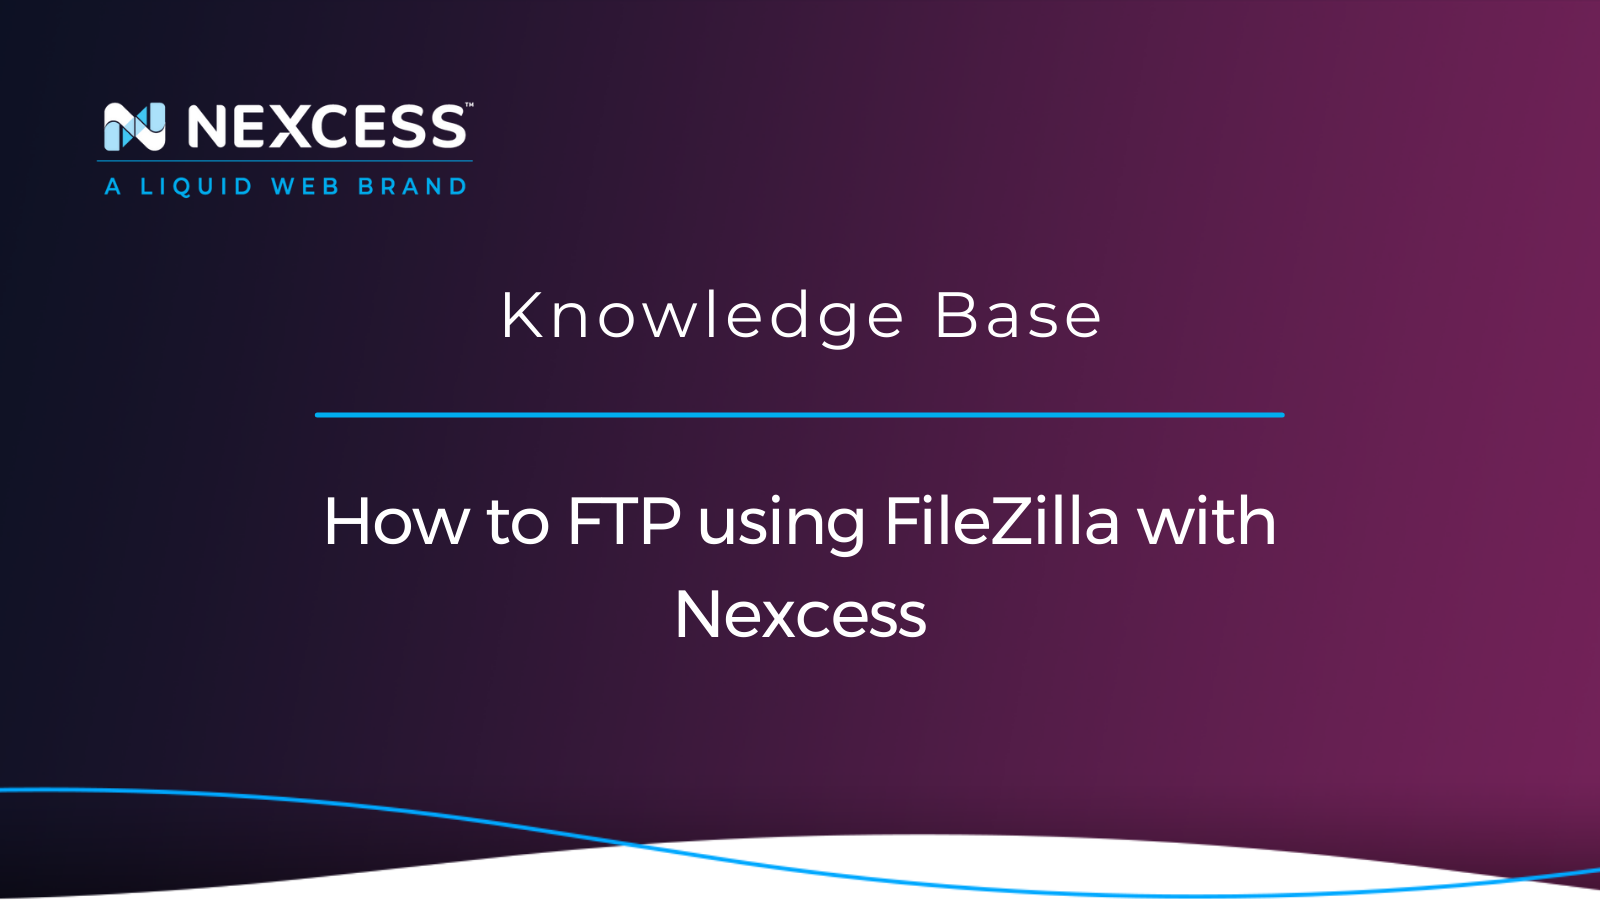 How to FTP using FileZilla with Nexcess